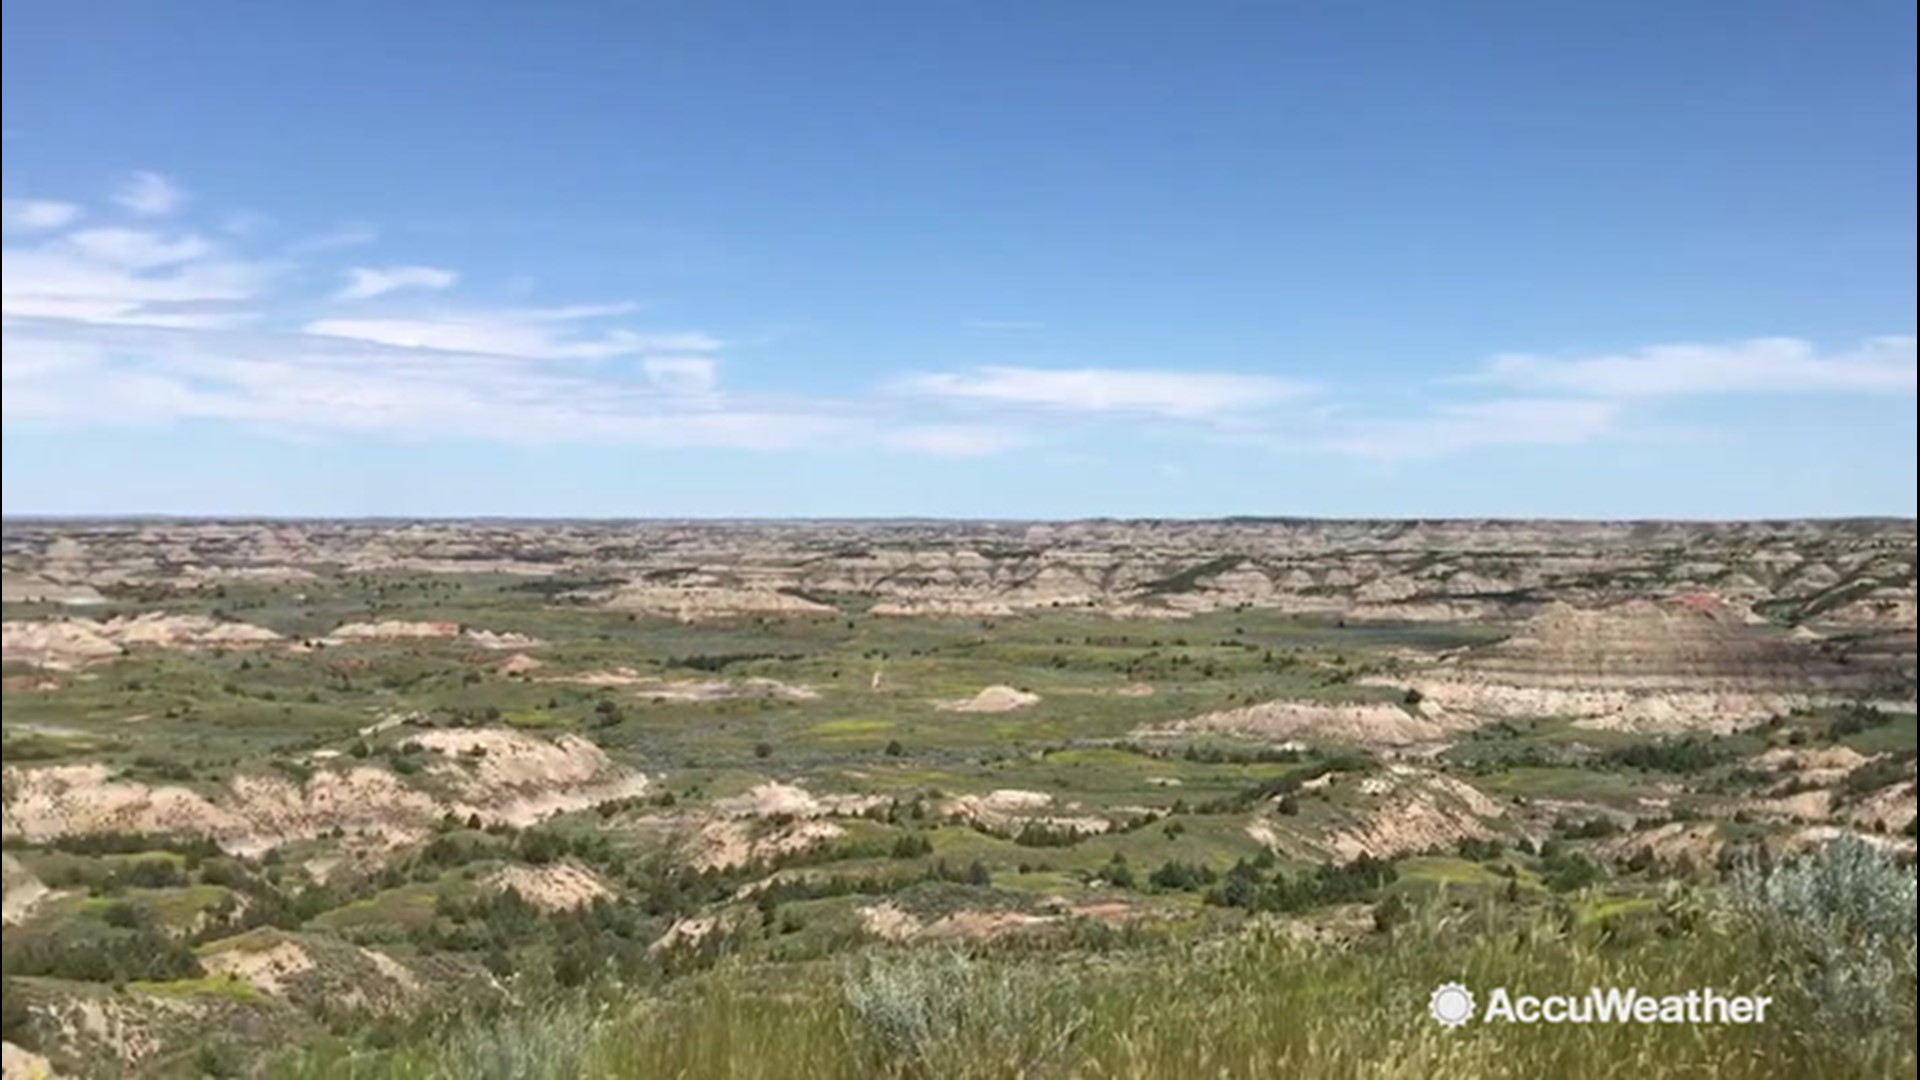 AccuWeather's #GreatAmericanRoadTrip continues as Lincoln Riddle and his wife Holly are trekking across the United States bringing us stories from the upper Midwest. Here, they stop at one of nature's stunning wonders, the Painted Canyon, in the Theodore Roosevelt National Park in Belfield, North Dakota.